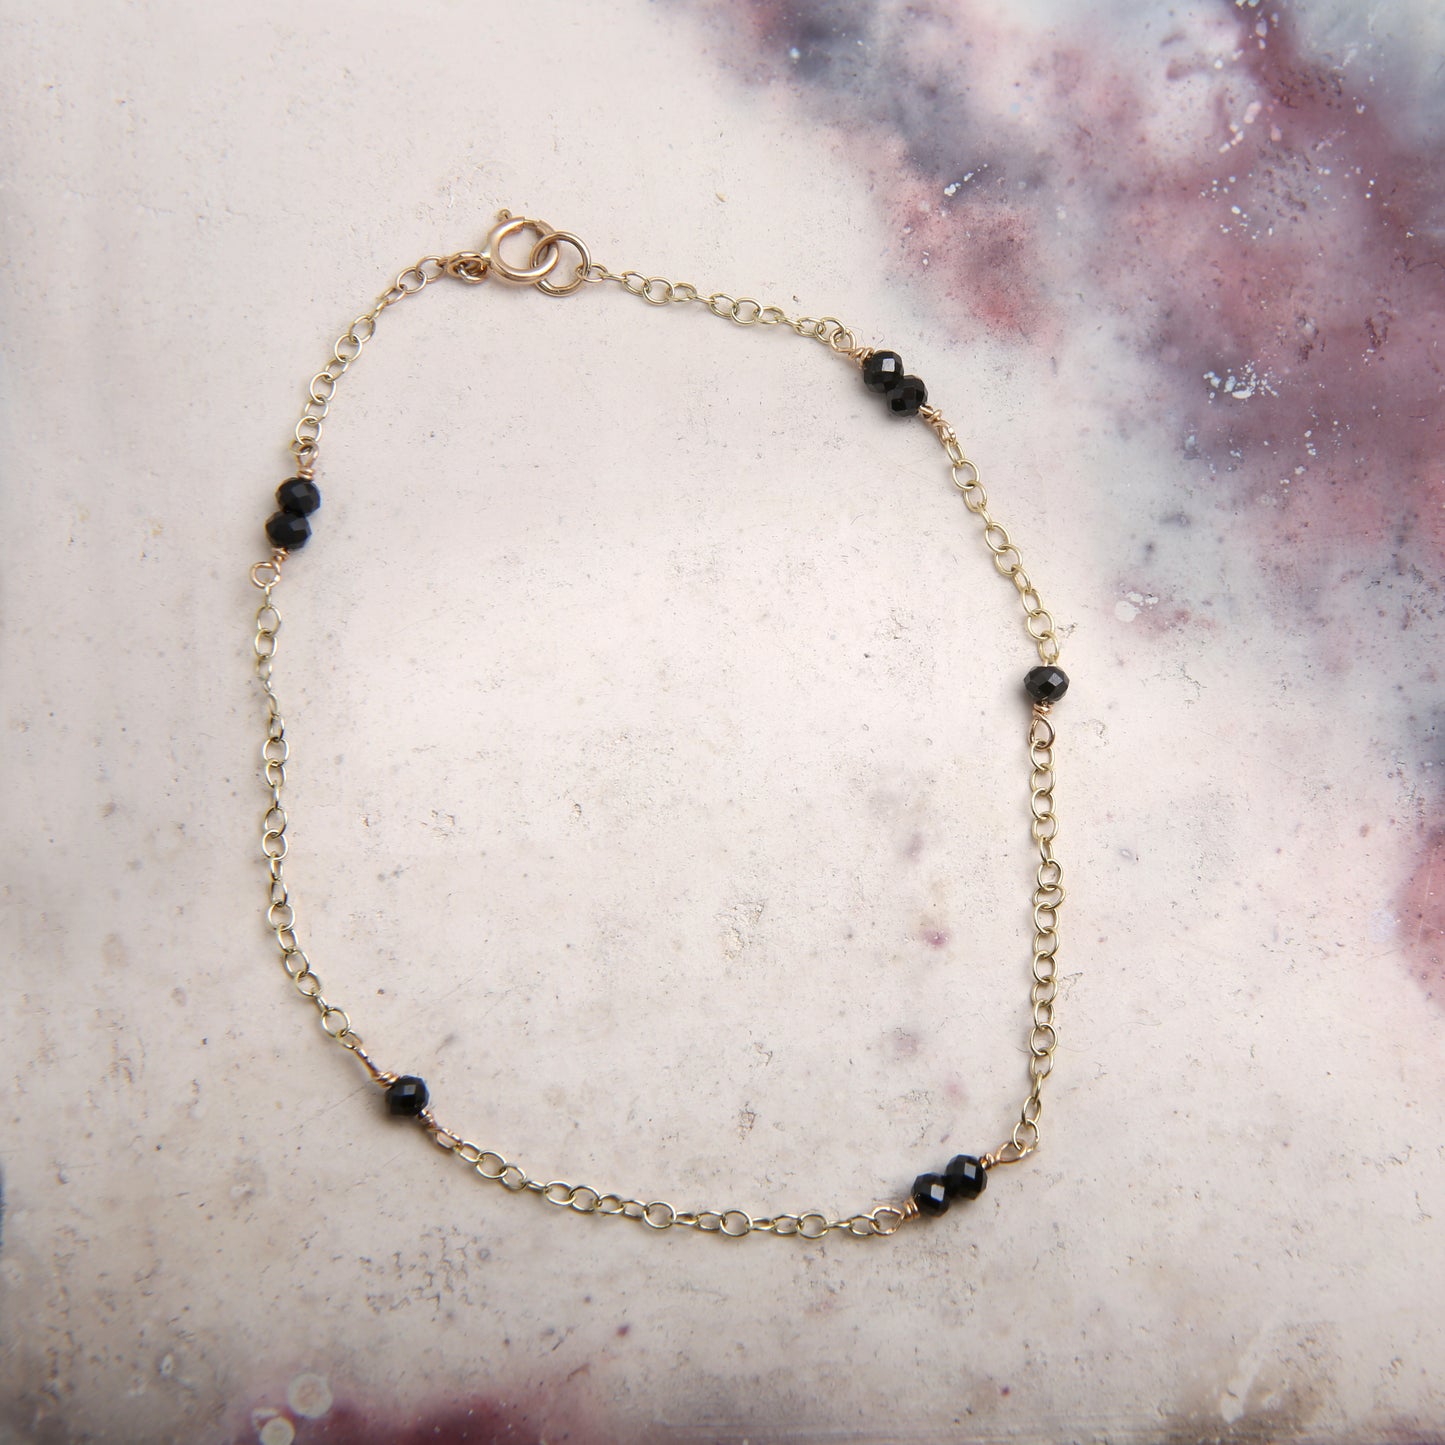 handmade faceted gemstone chain bracelet with black spinel beads